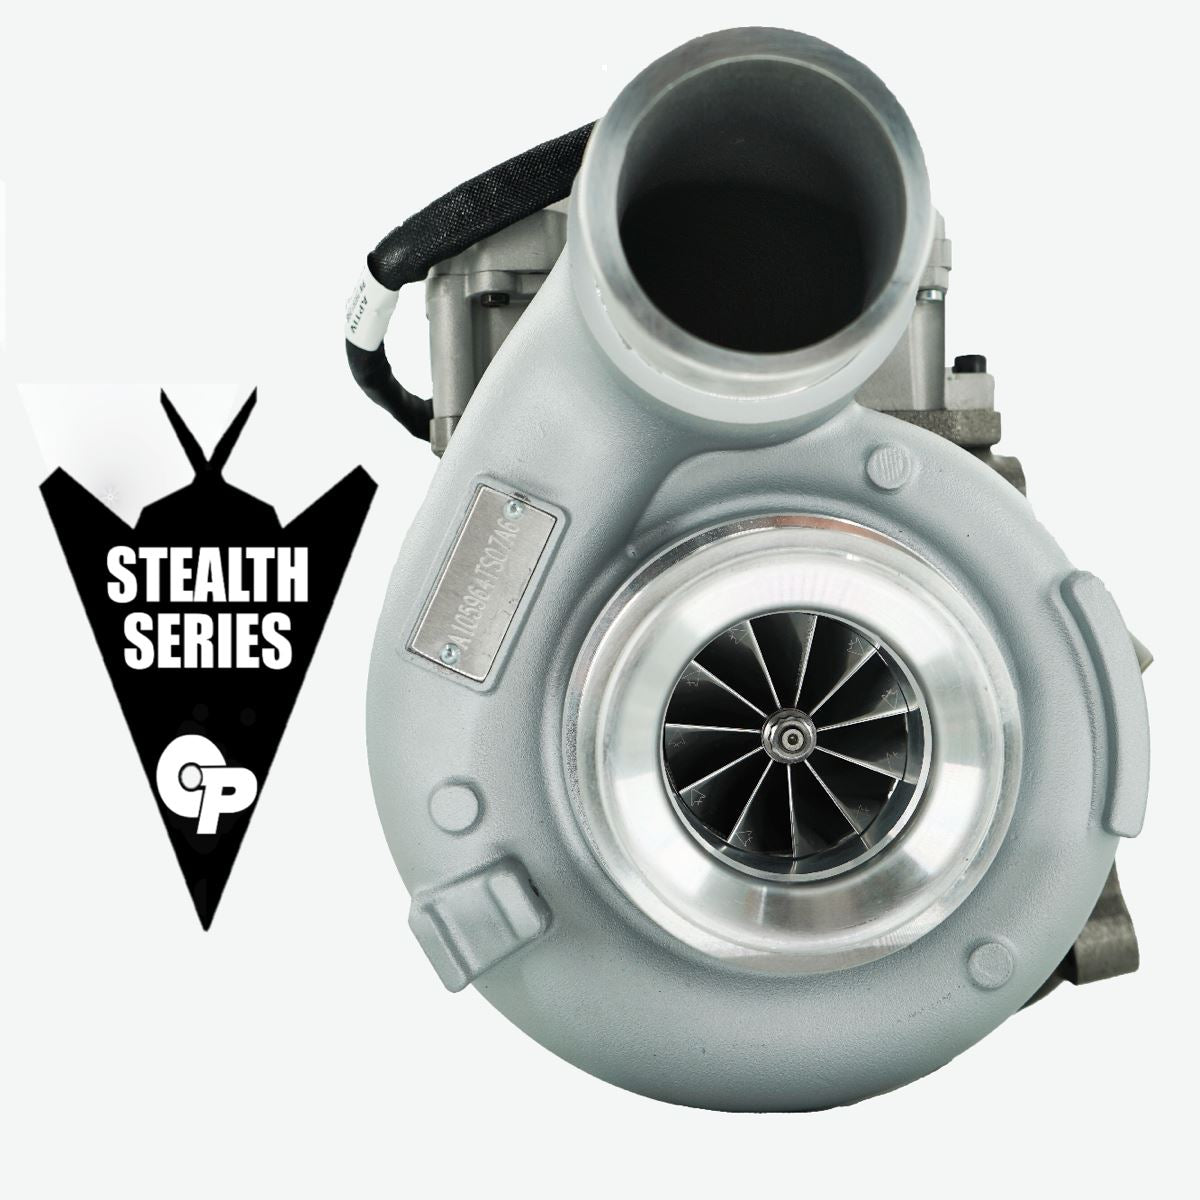 HE351VE Stealth Mach 1 64 Turbo (2010-2012 6.7L Cummins) Turbocharger Calibrated Power 